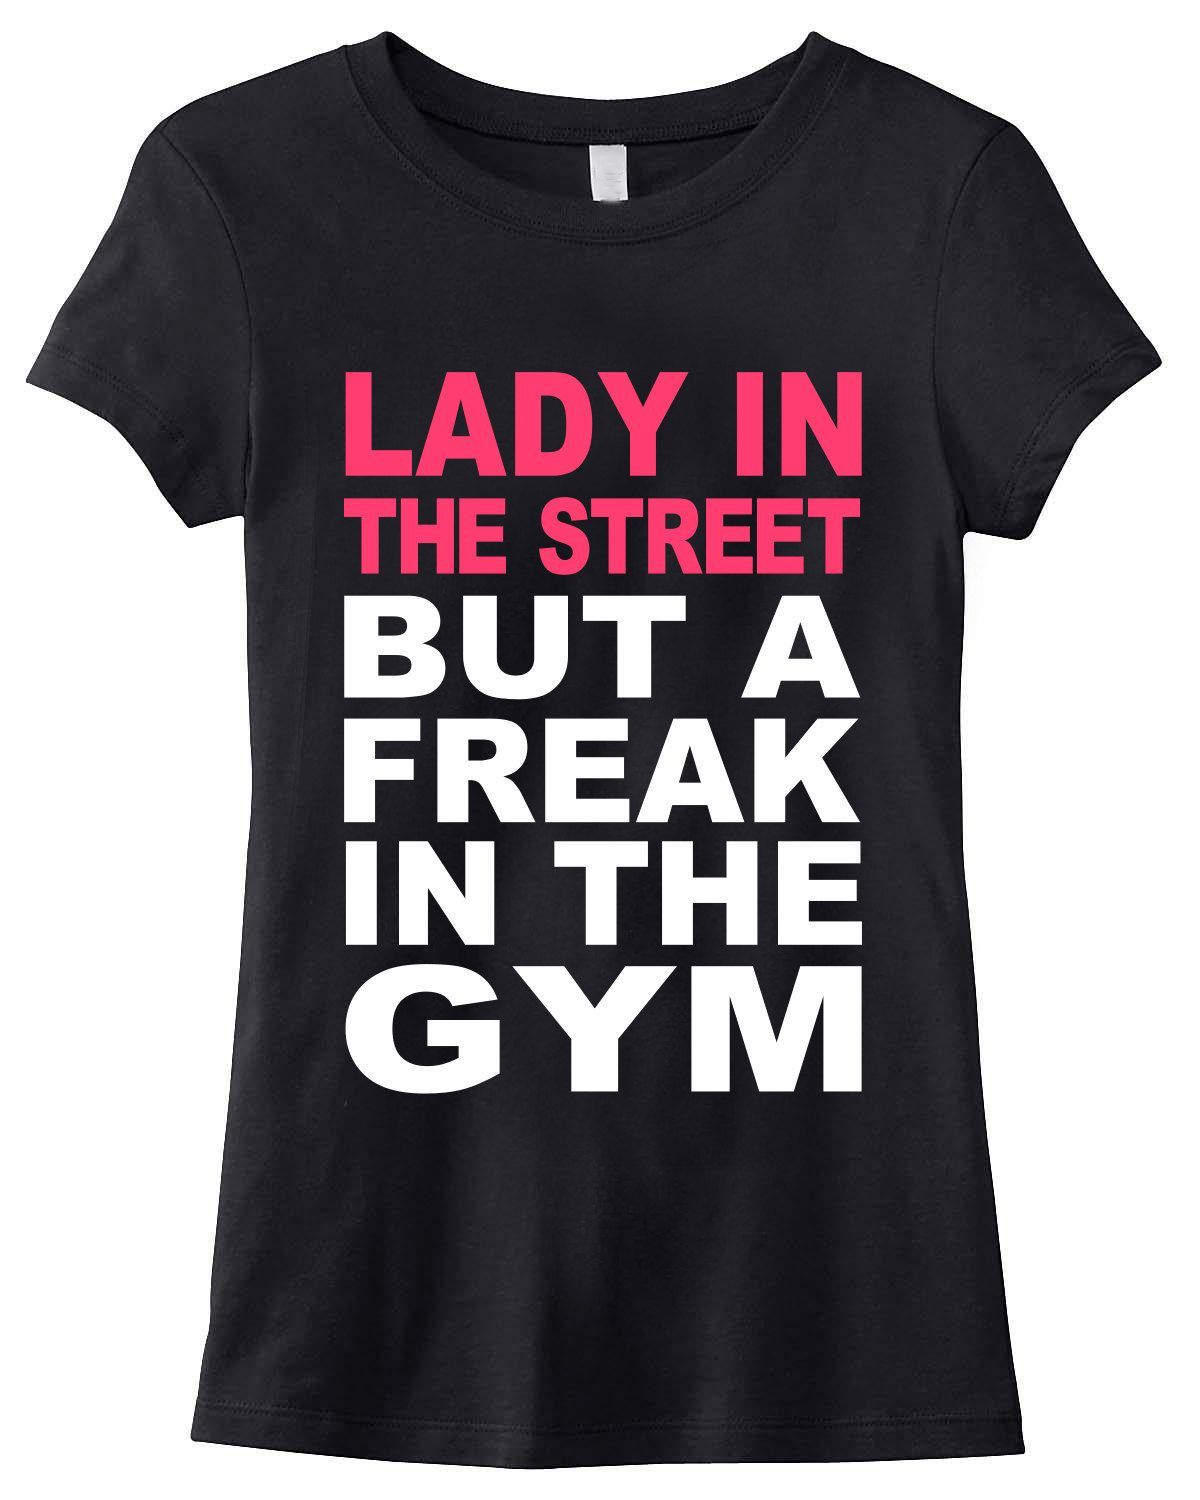 Lady In The Street But A Freak In The Gym Women's T-Shirt fitness workout. $